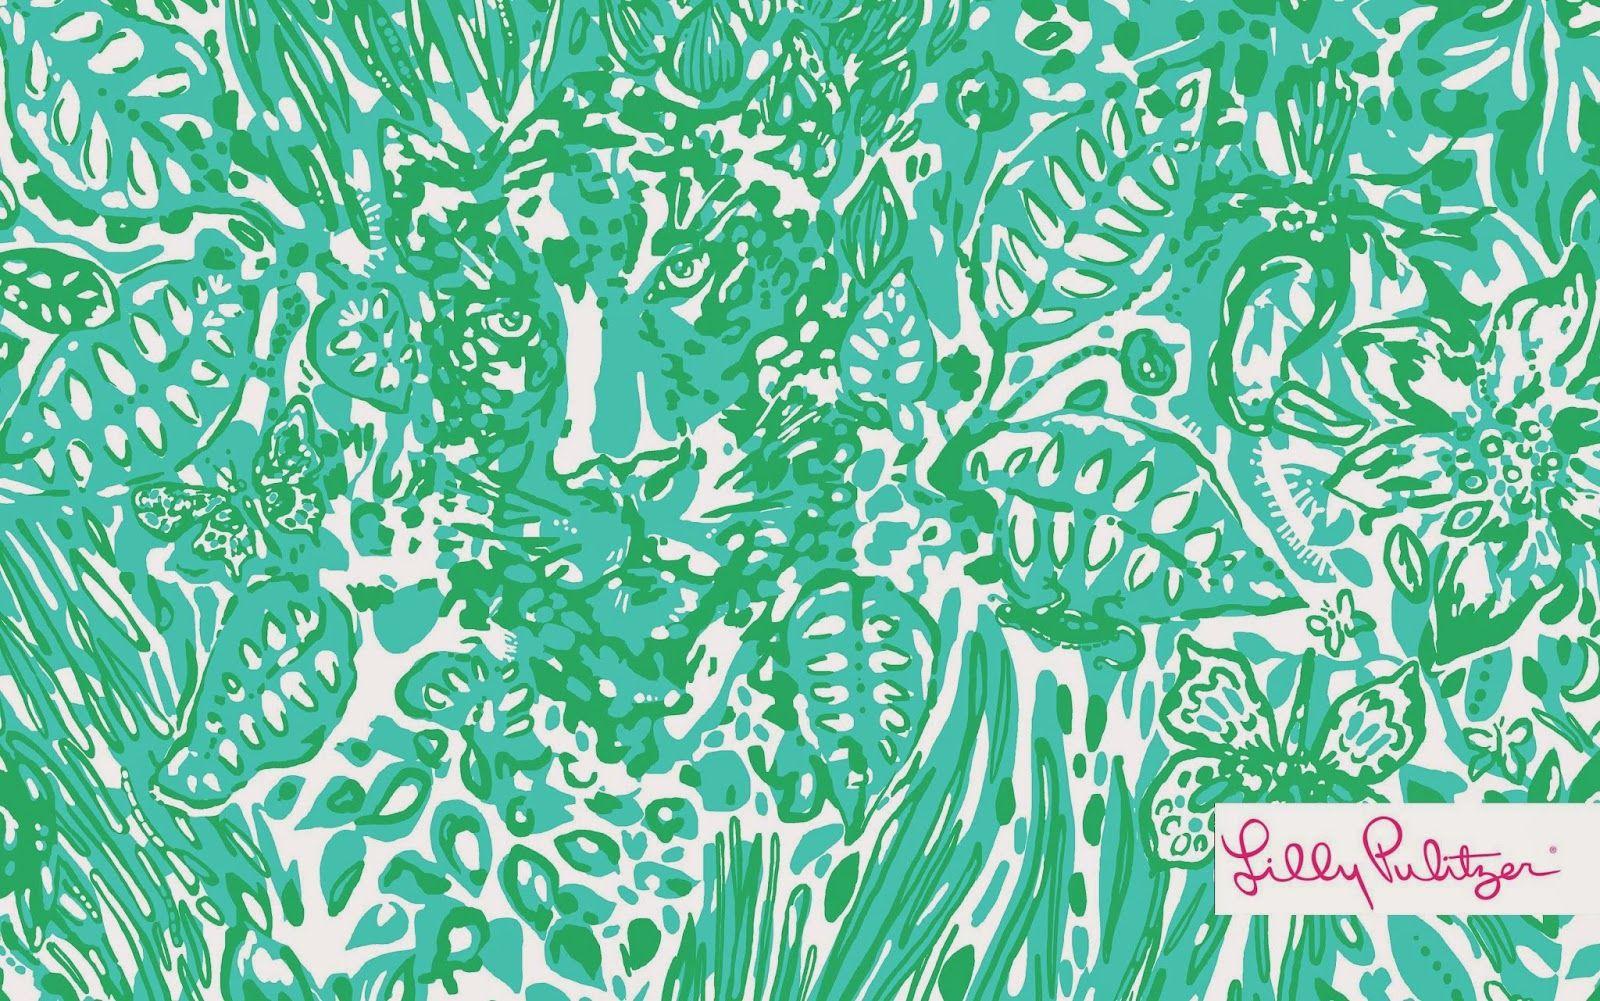 Lilly pulitzer fabric in the green and white - Preppy